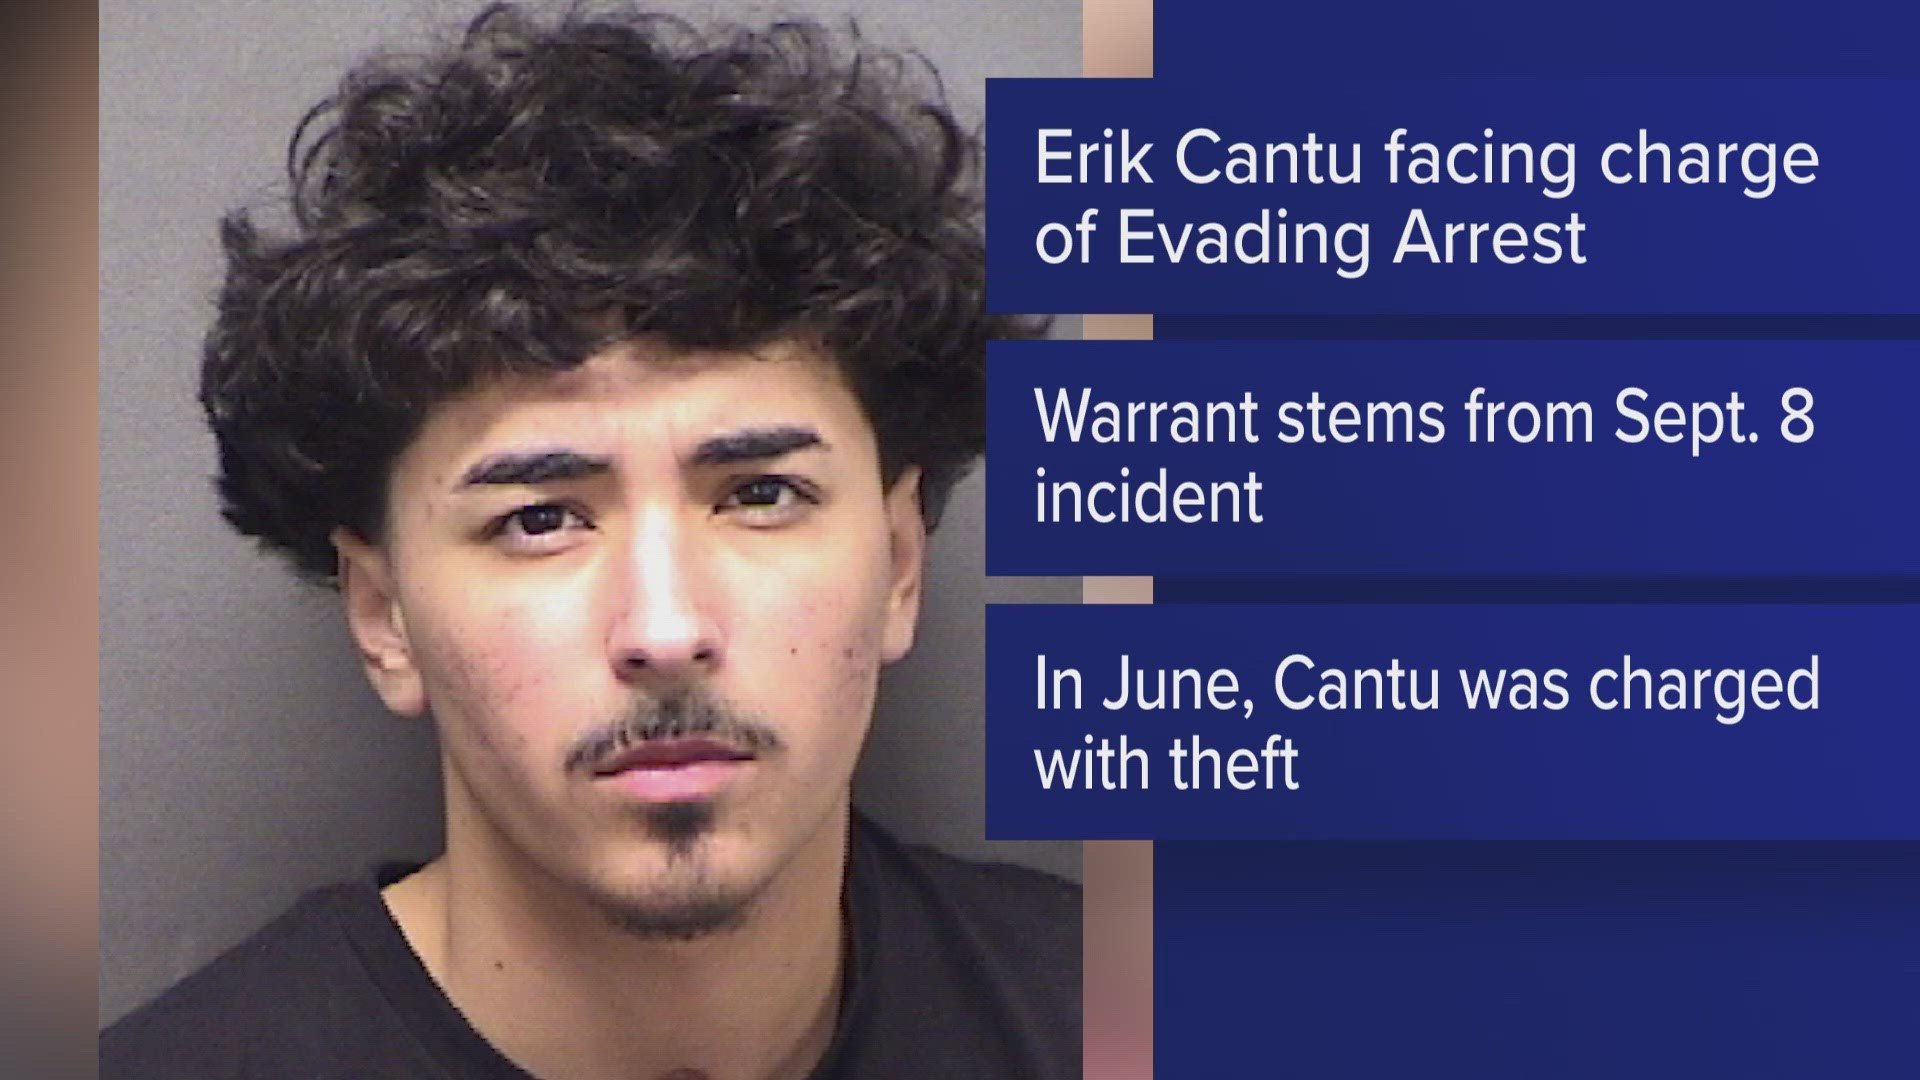 An arrest affidavit said a bike officer attempted to pull over Eric Cantu when he was driving downtown playing loud music, and he sped off.